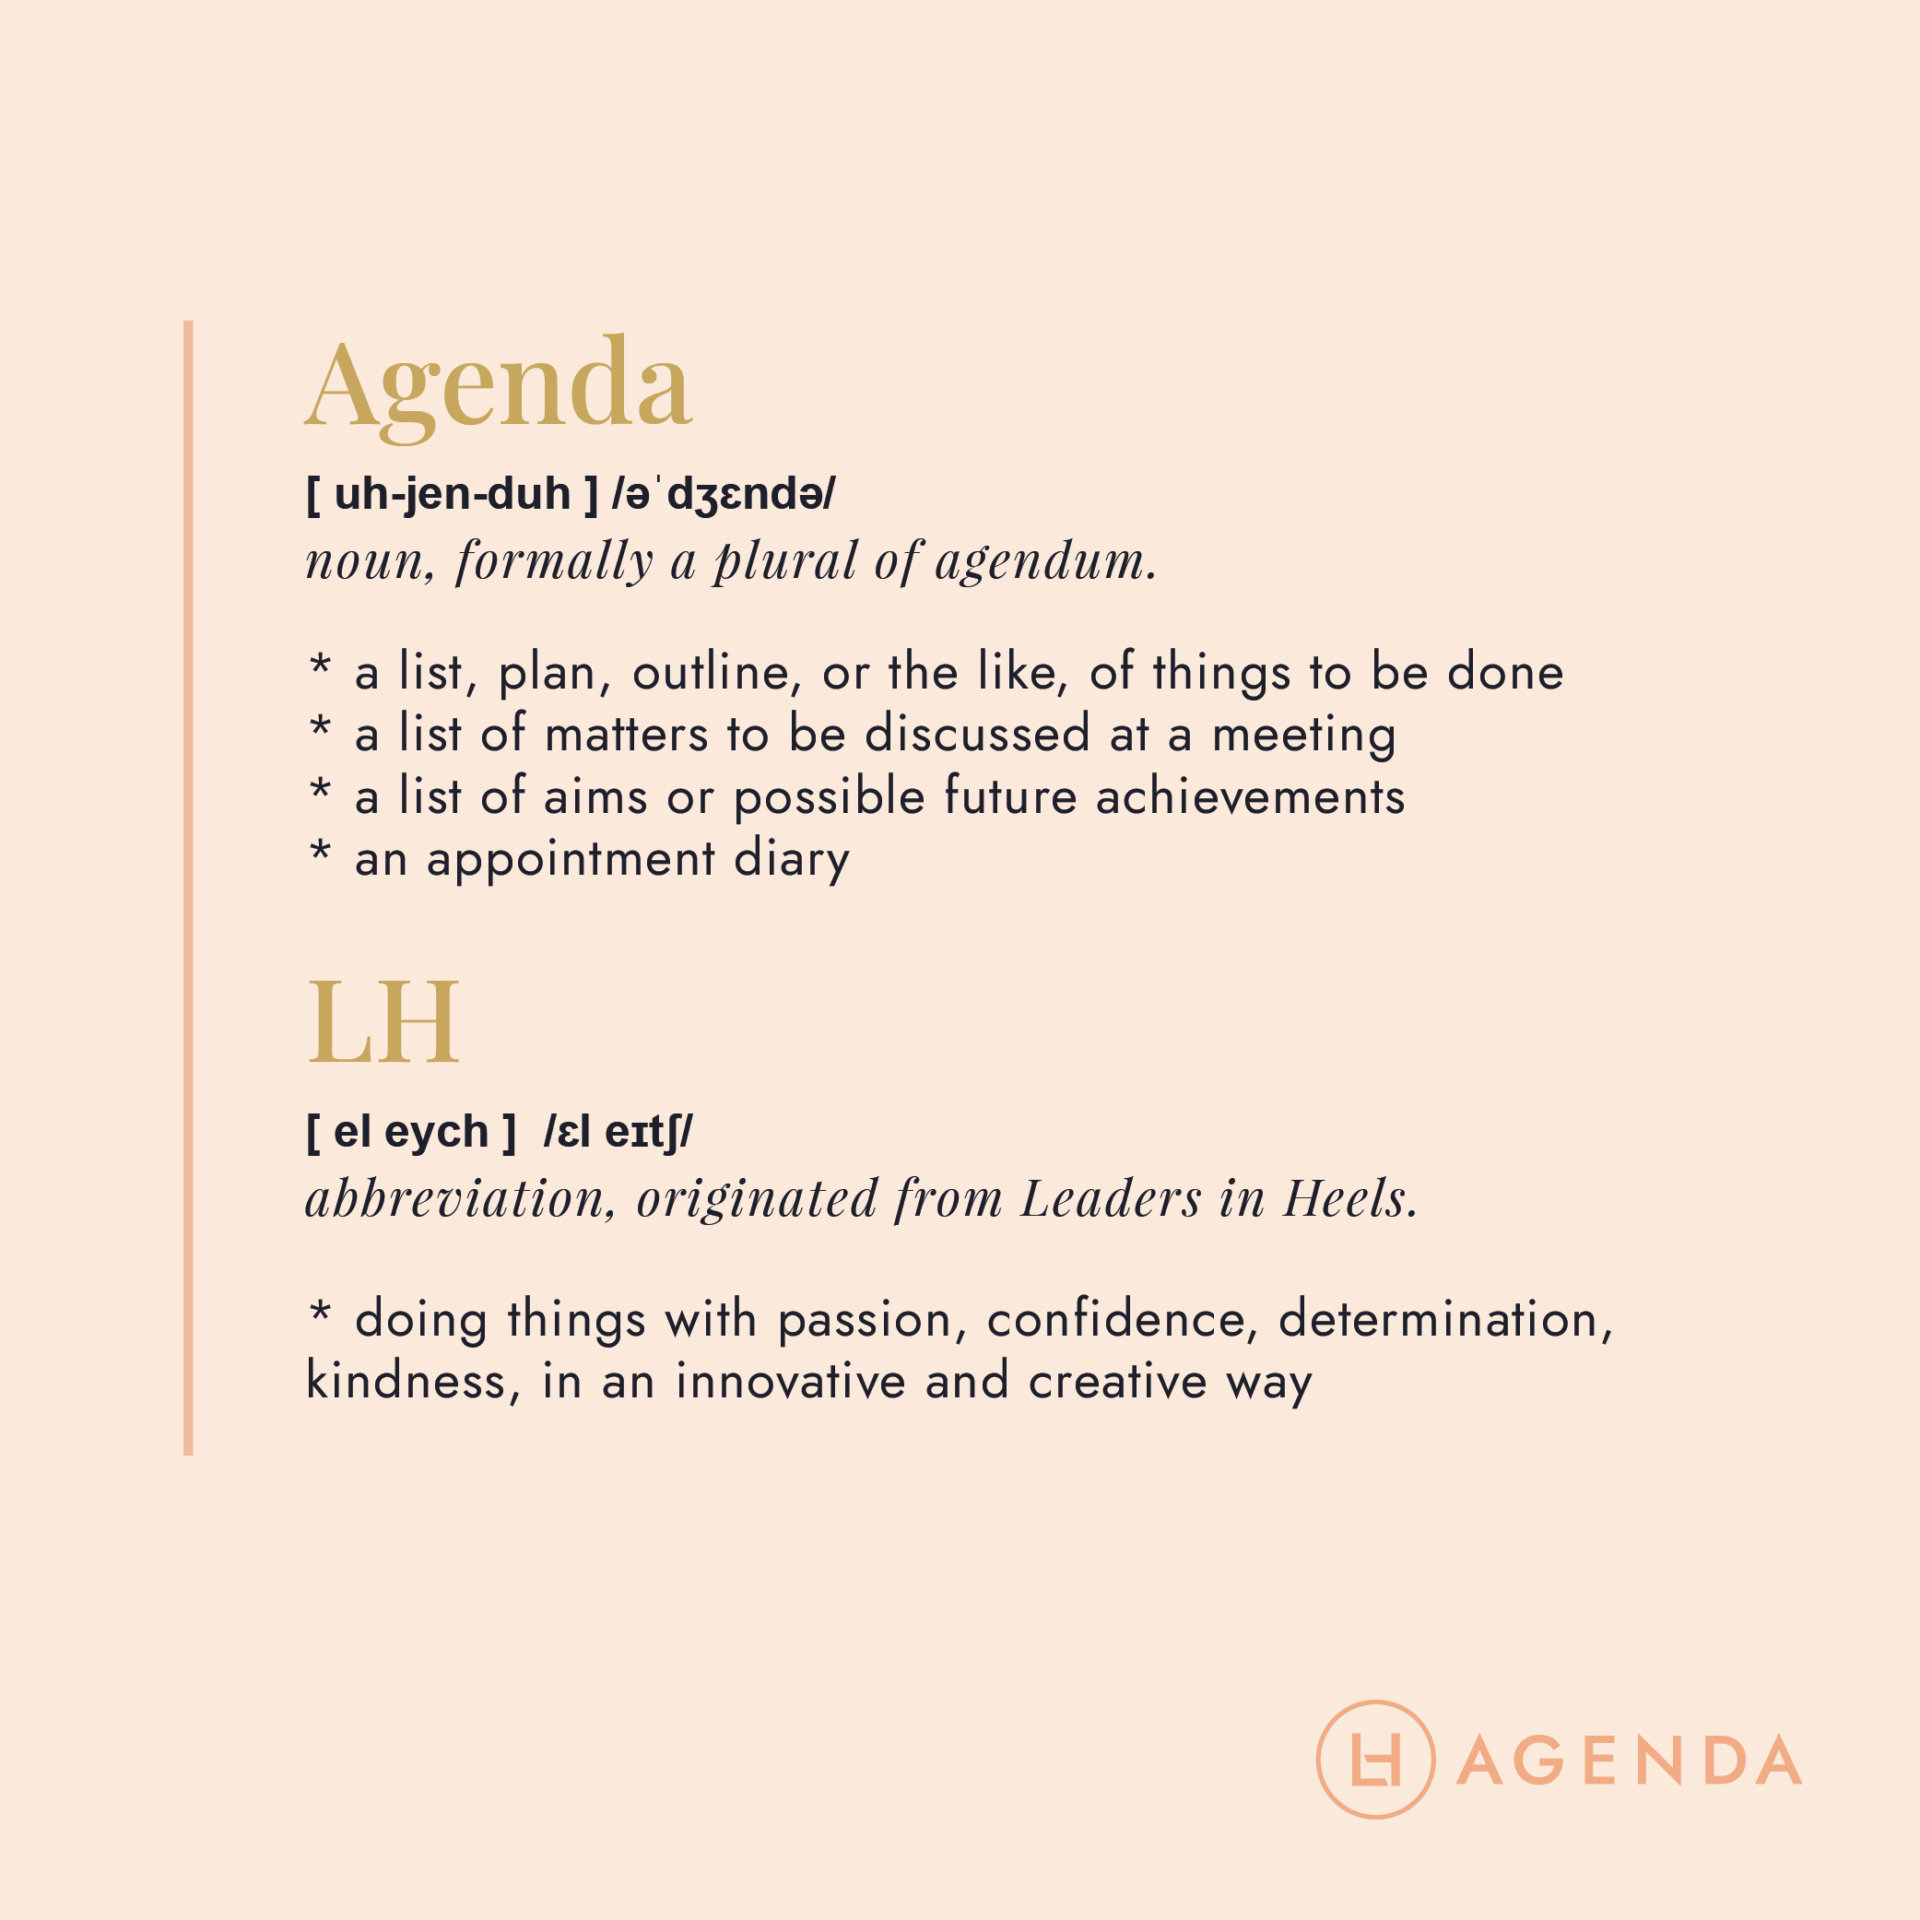 LH Agenda Meaning